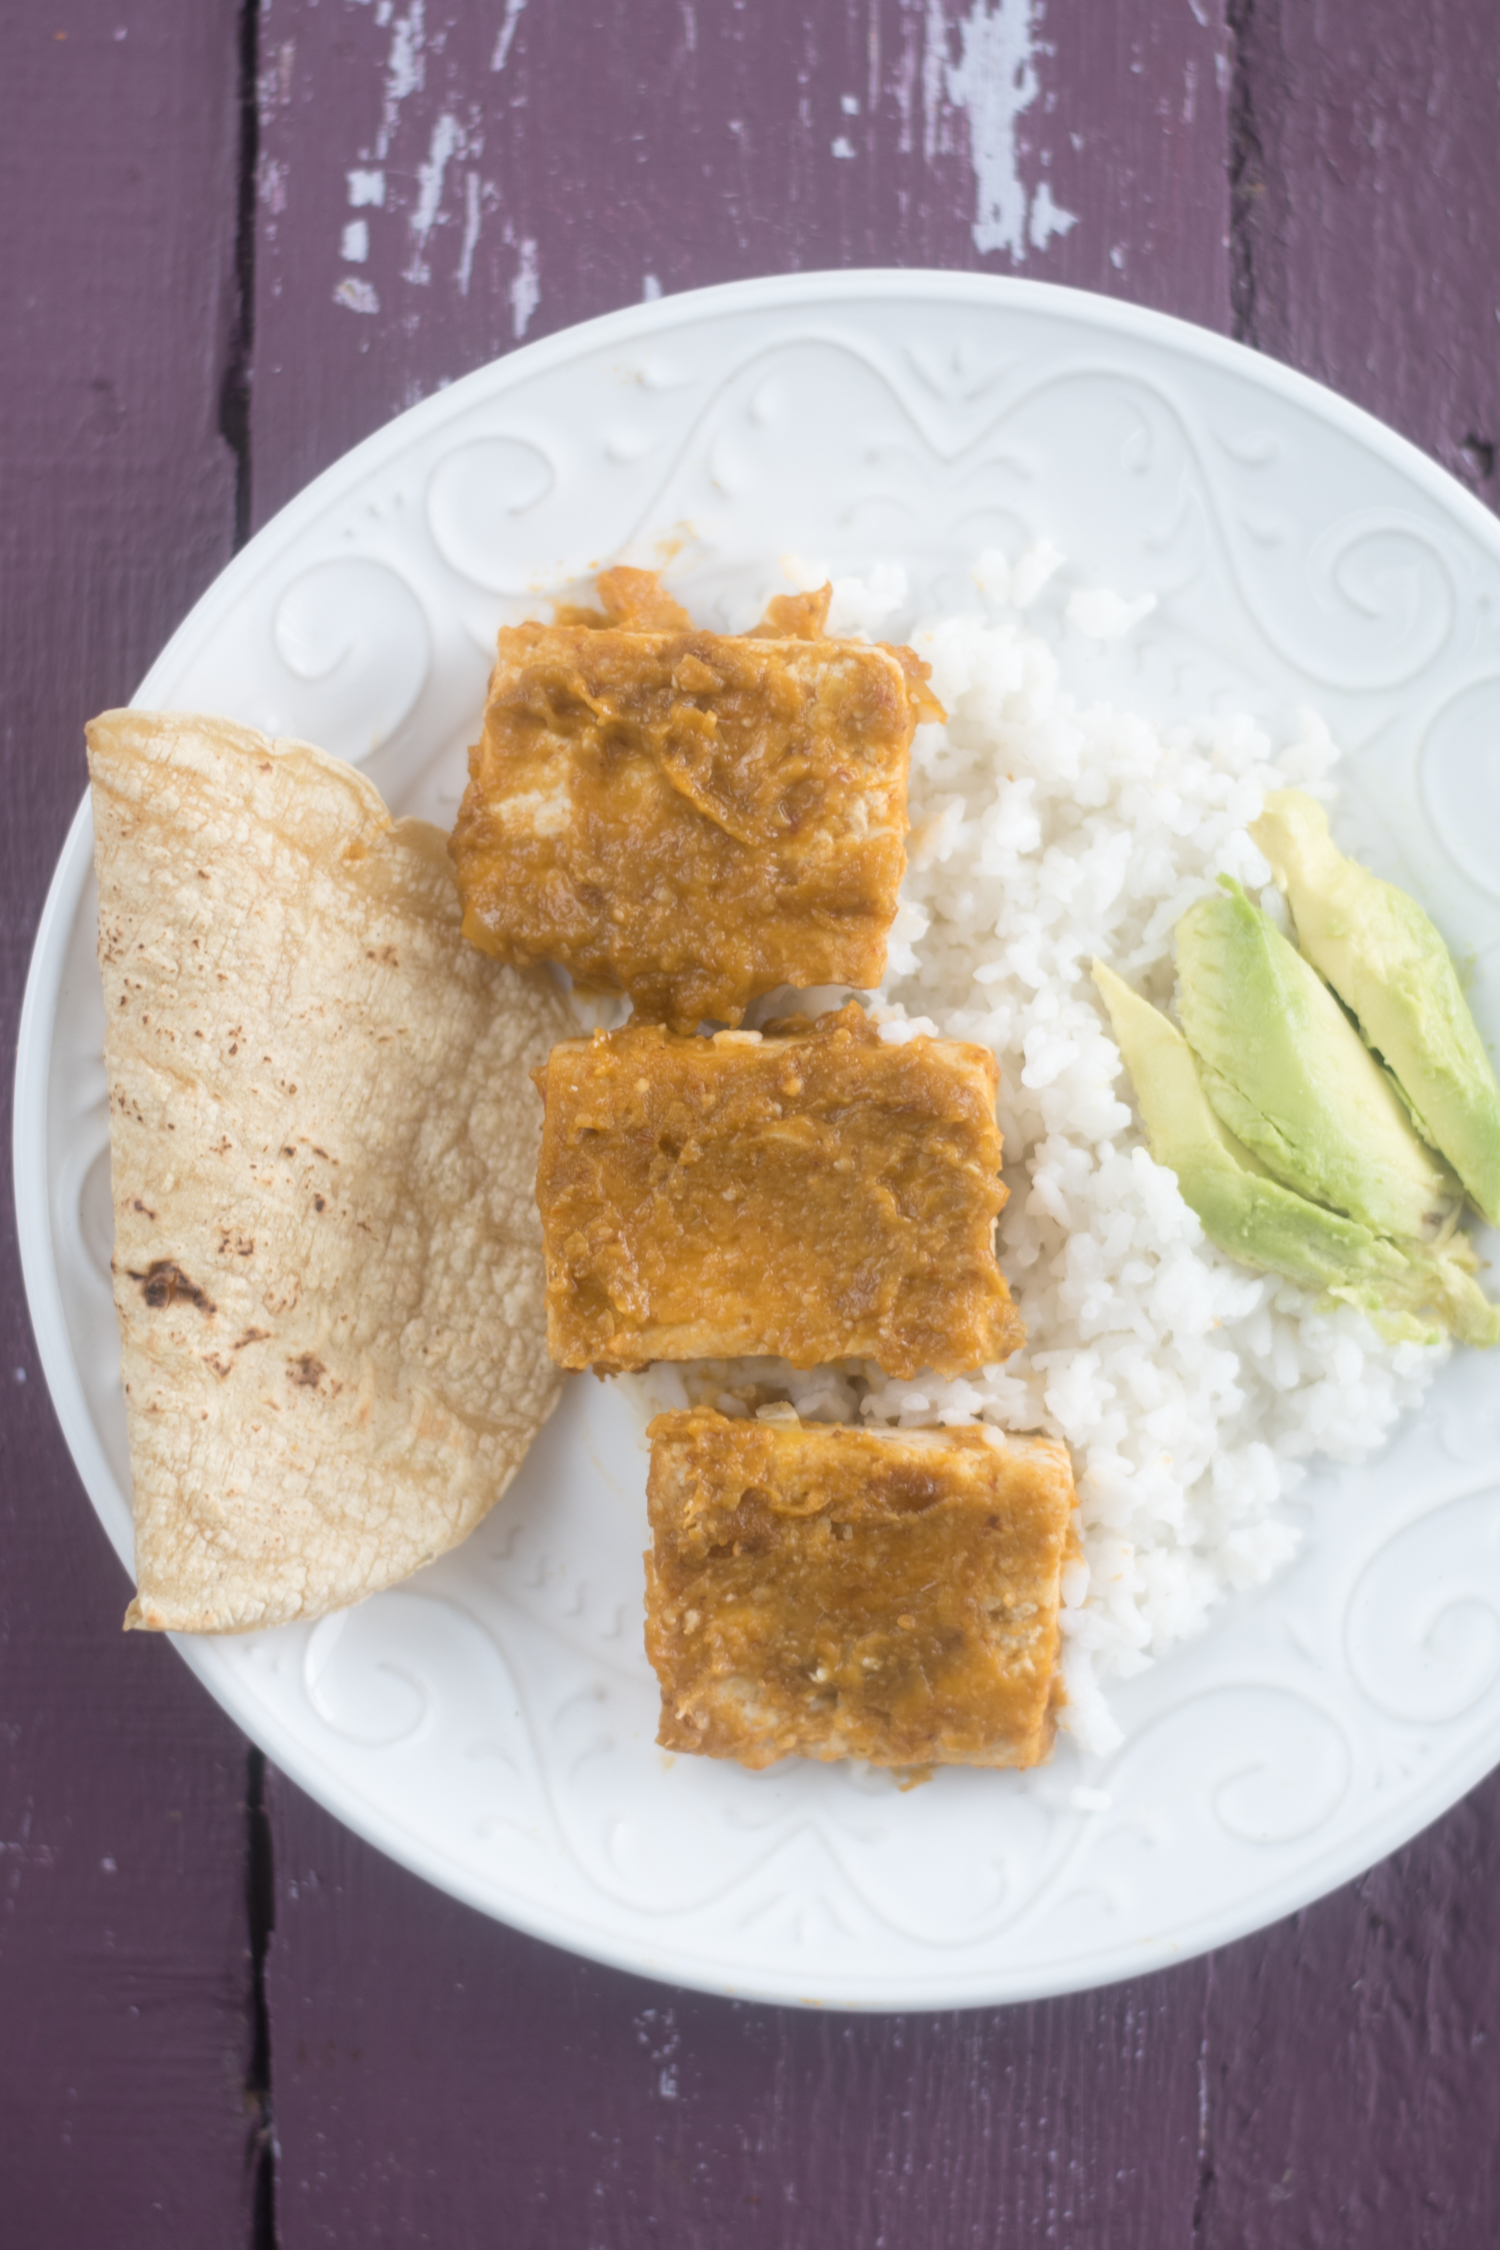 Tomatillo Chipotle Tofu served with rice, tortillas, and rice is a delicious vegan meal! 